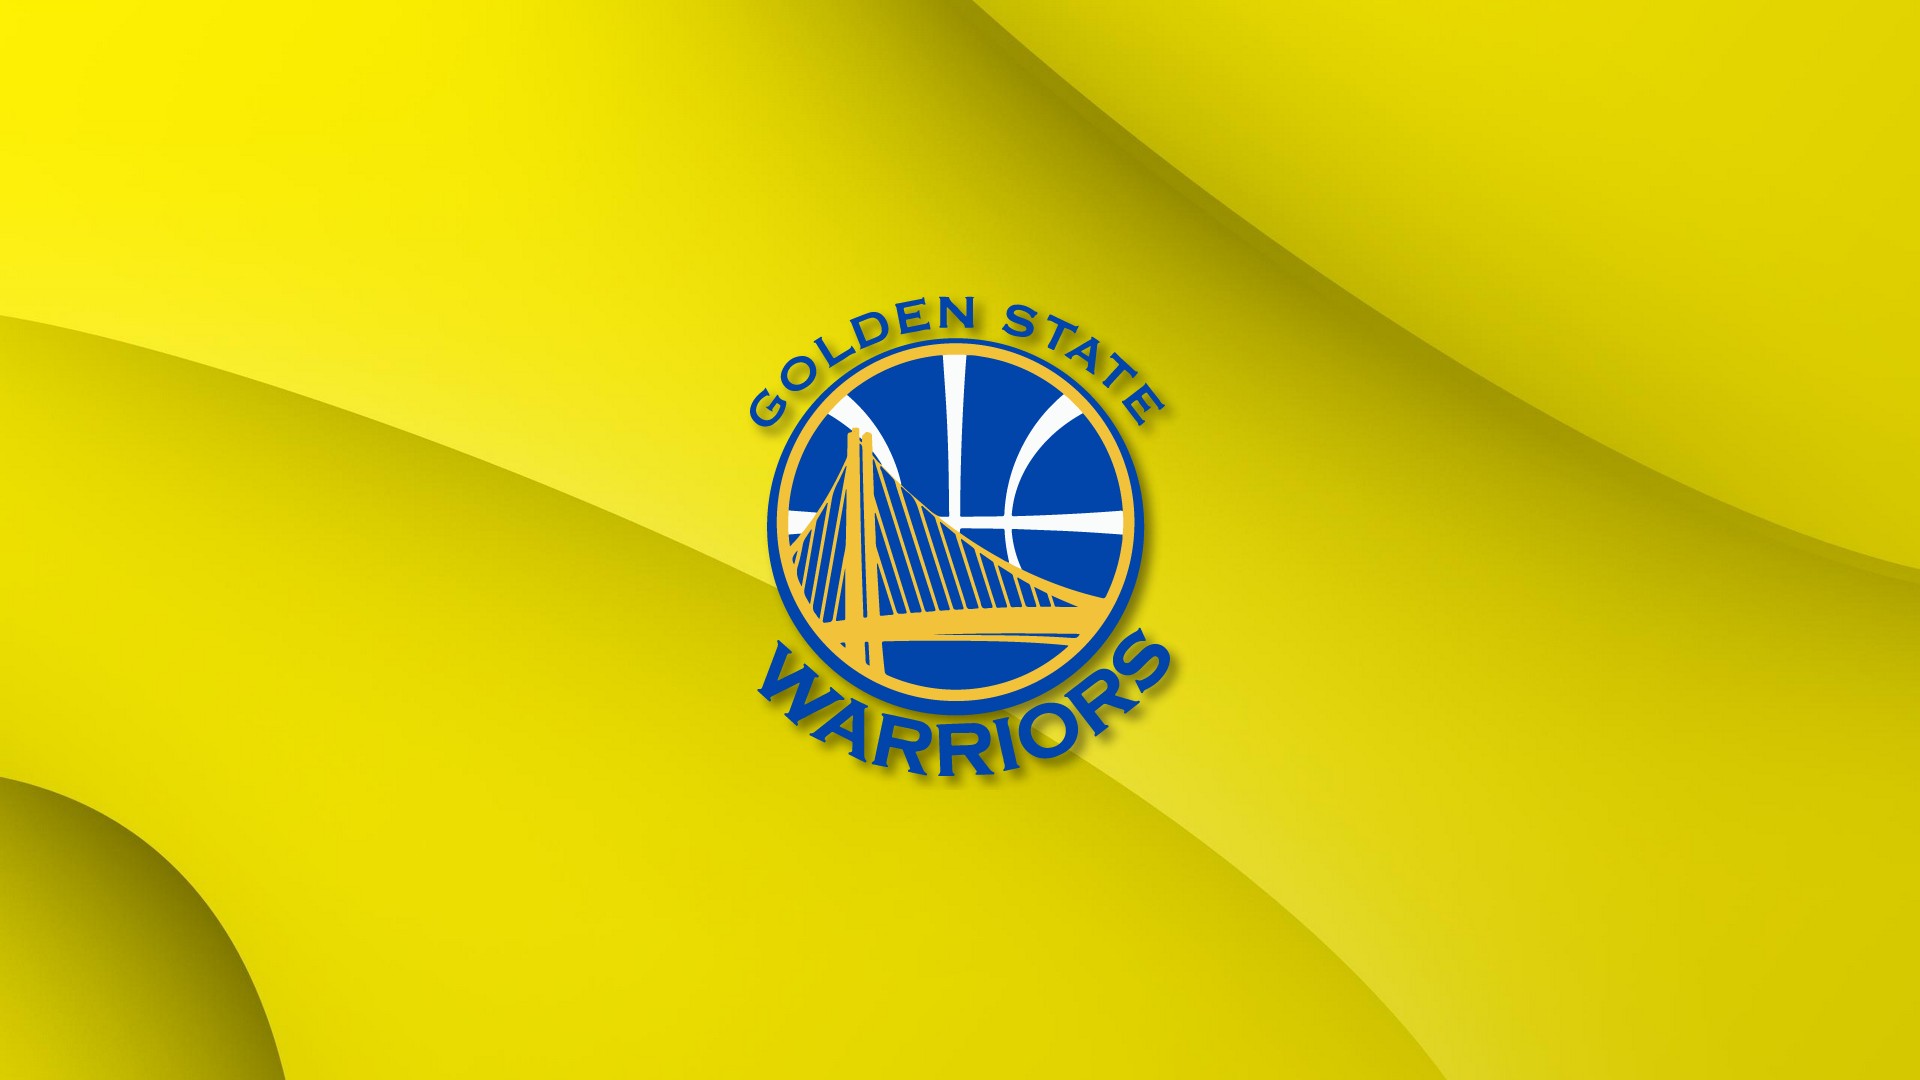 Wallpapers Computer Golden State Warriors With Resolution 1920X1080 pixel. You can make this wallpaper for your Desktop Computer Backgrounds, Mac Wallpapers, Android Lock screen or iPhone Screensavers